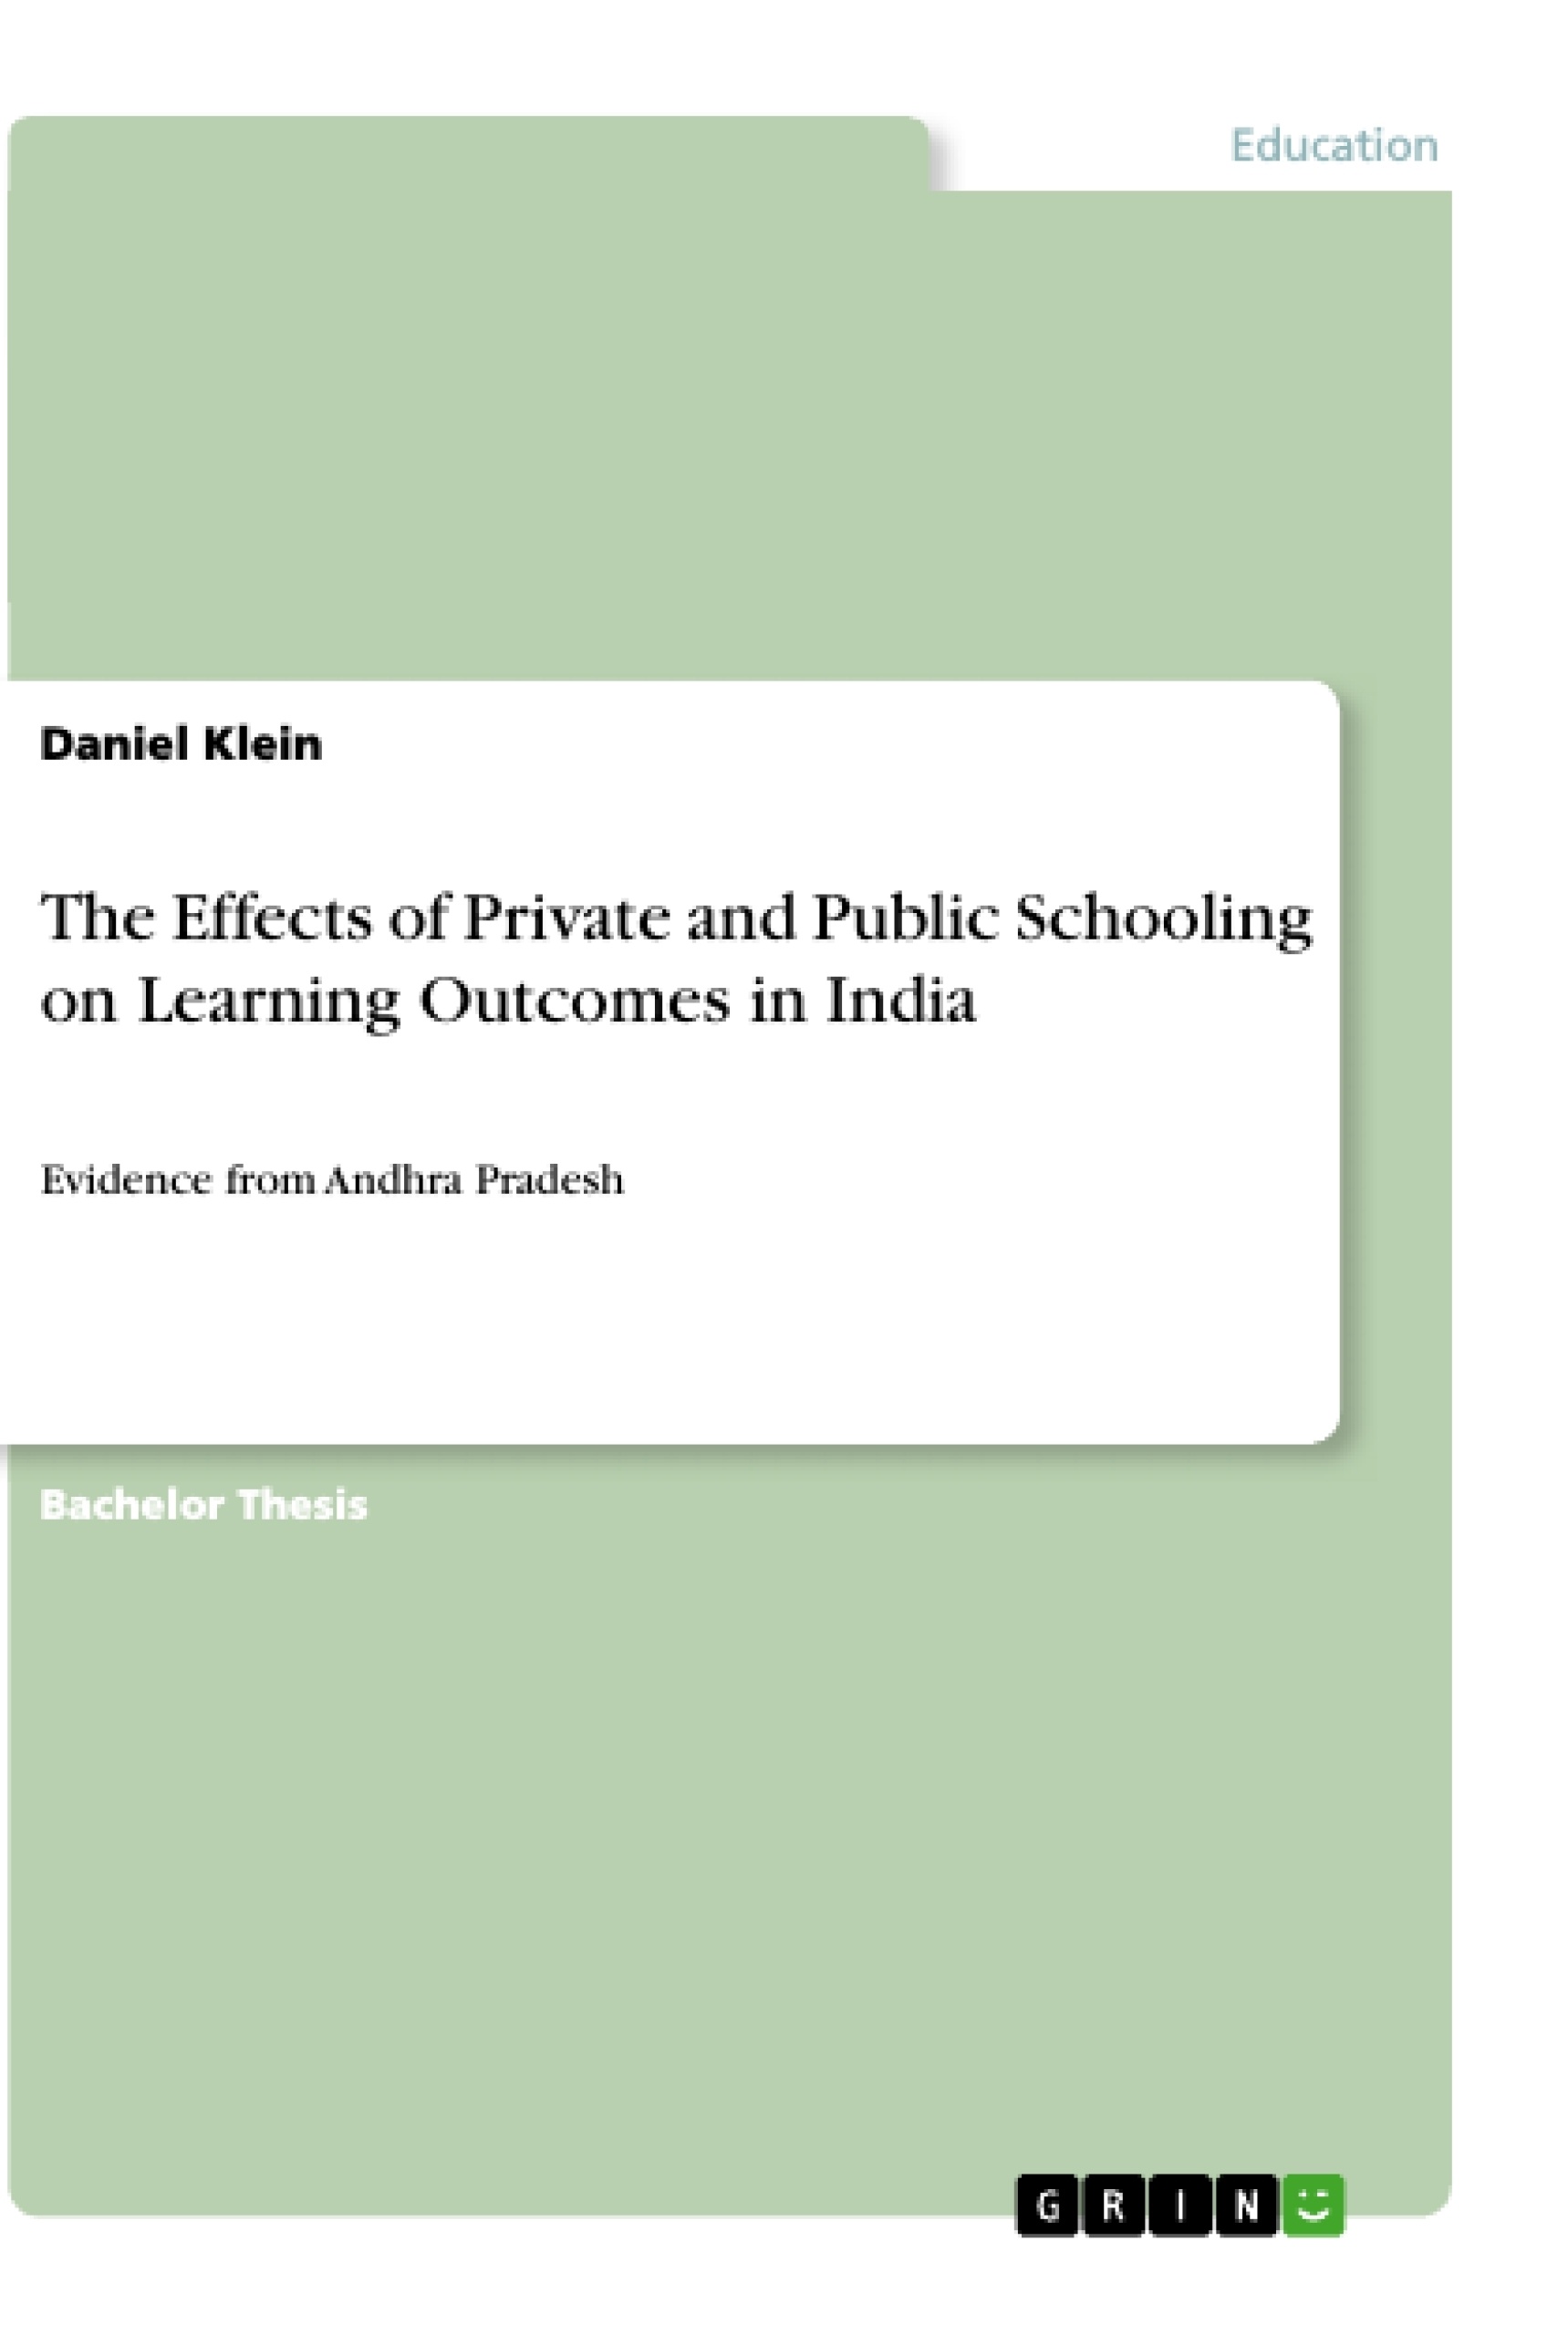 Titre: The Effects of Private and Public Schooling on Learning Outcomes in India